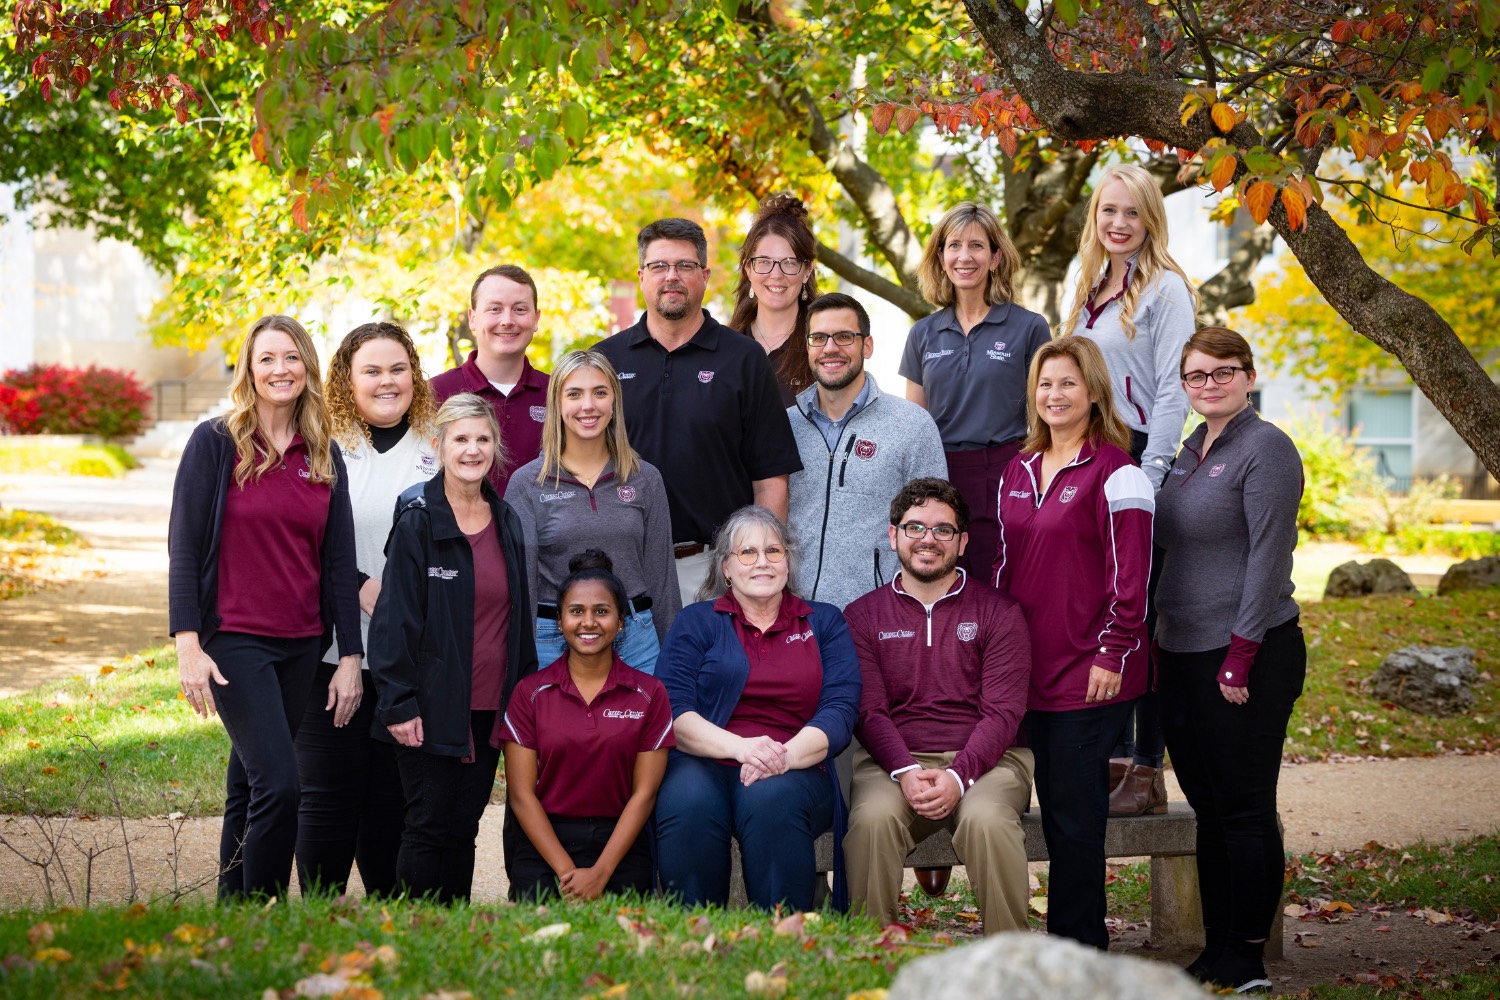 The Career Center staff poses for a photo on a beautiful autumn day on campus